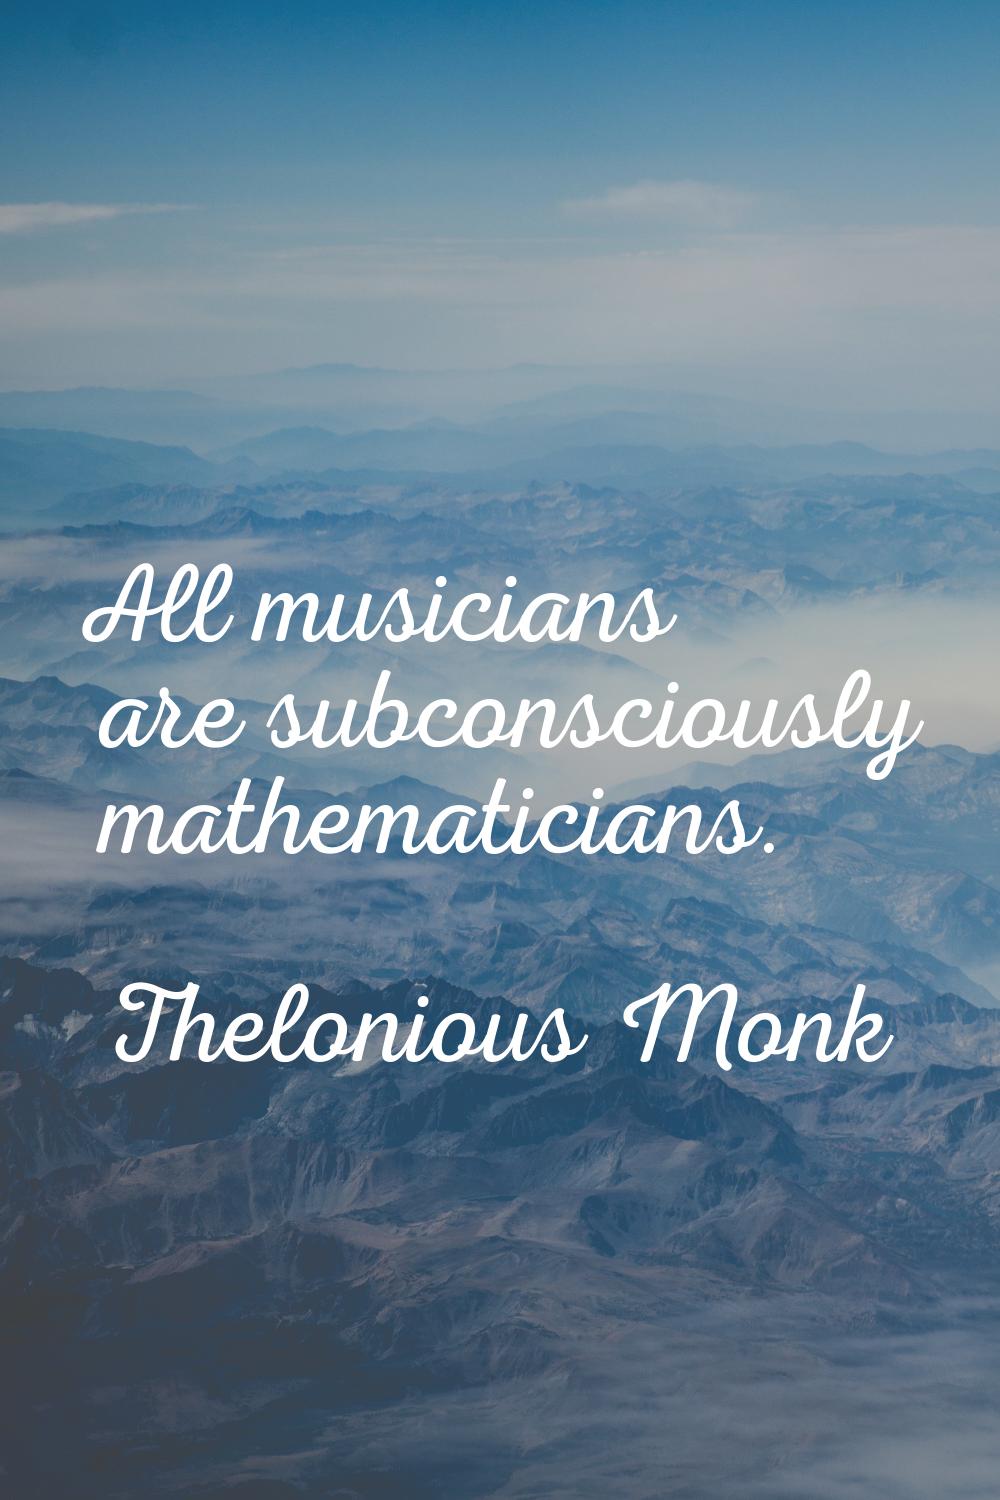 All musicians are subconsciously mathematicians.